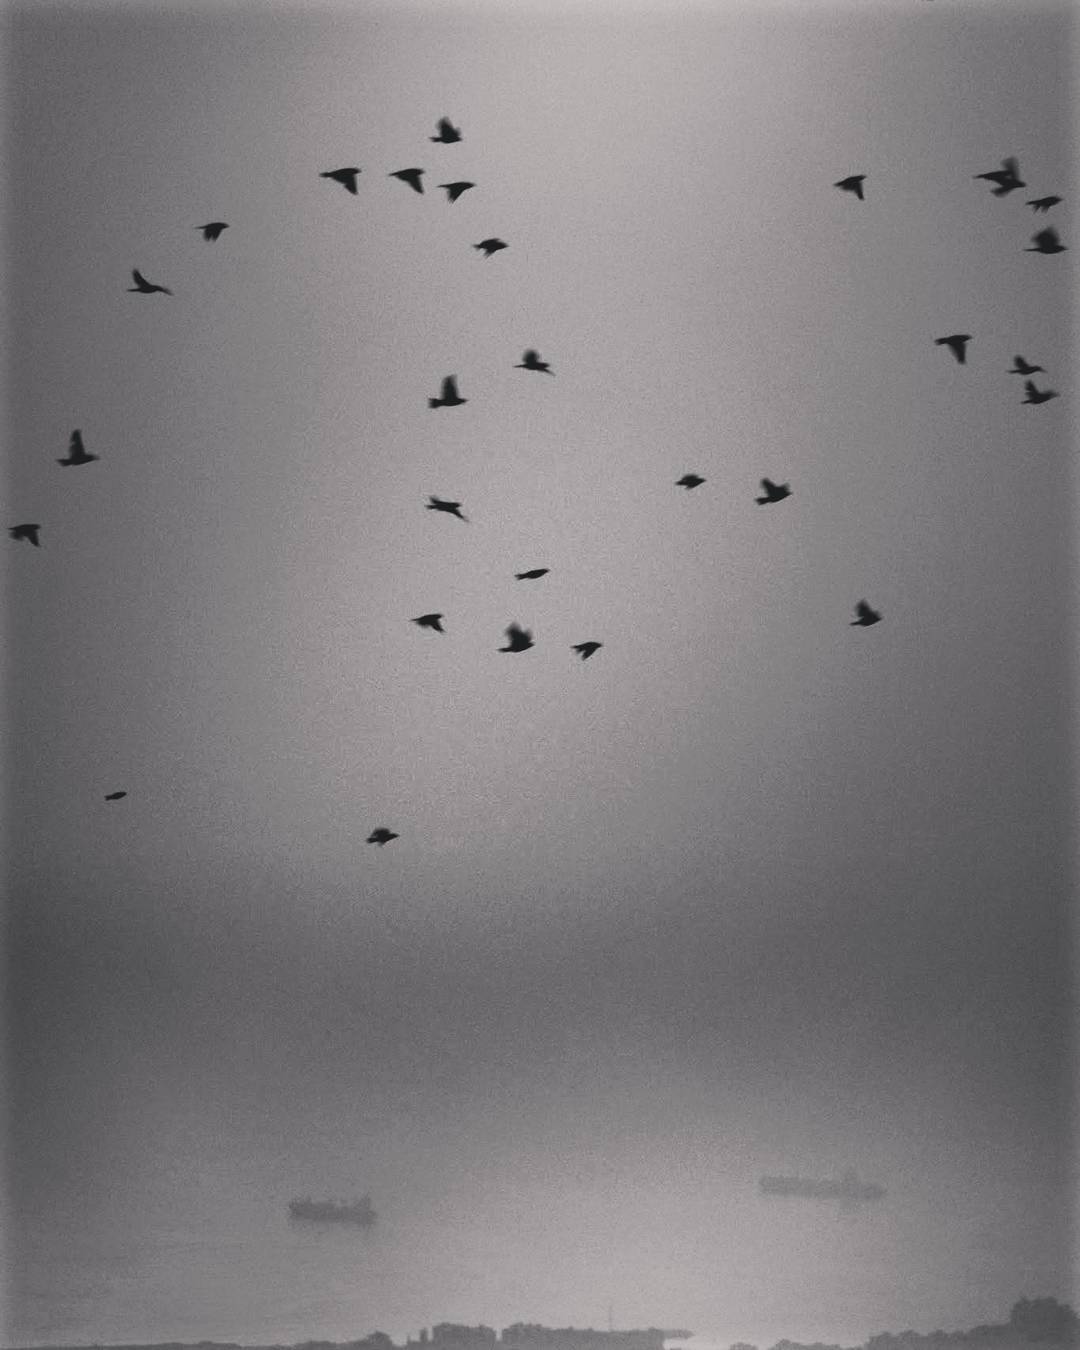  fog  landscape  birds  photooftheday  picoftheday... more monochrome photography at http://bnw.alahay.org